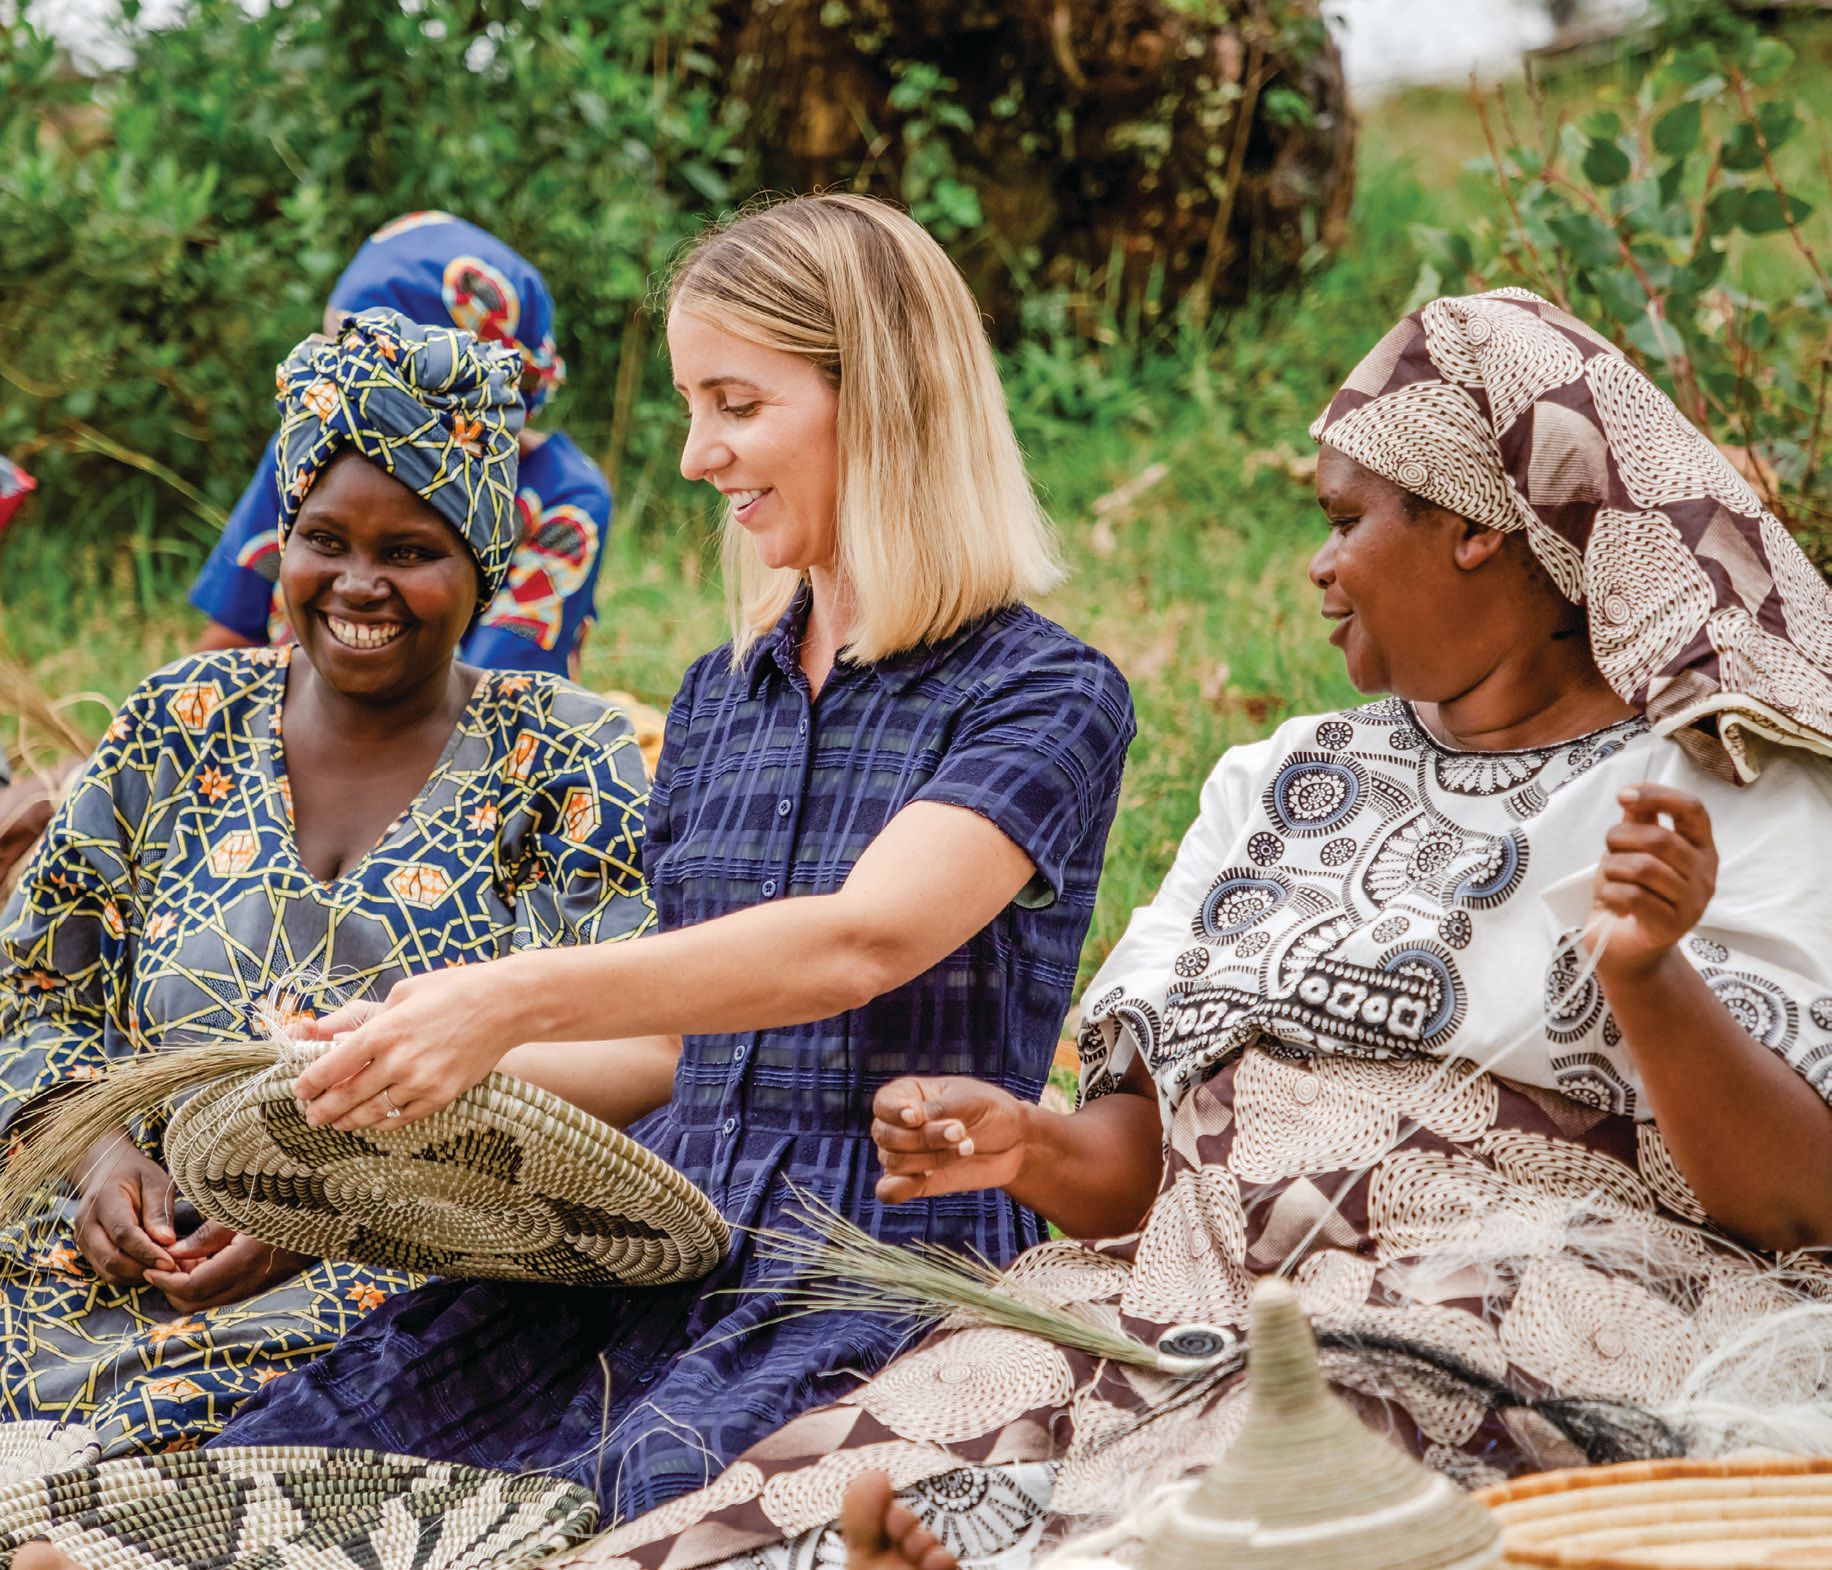 Through Kazi co-founder Alicia Wallace’s business model, her team of artisans have been able to support more than 34,000 dependents. Here, Wallace (middle) works with Jacqueline Uwimanimpaye and Placidia Niyoyita to create handwoven pieces. PHOTO COURTESY OF KAZI